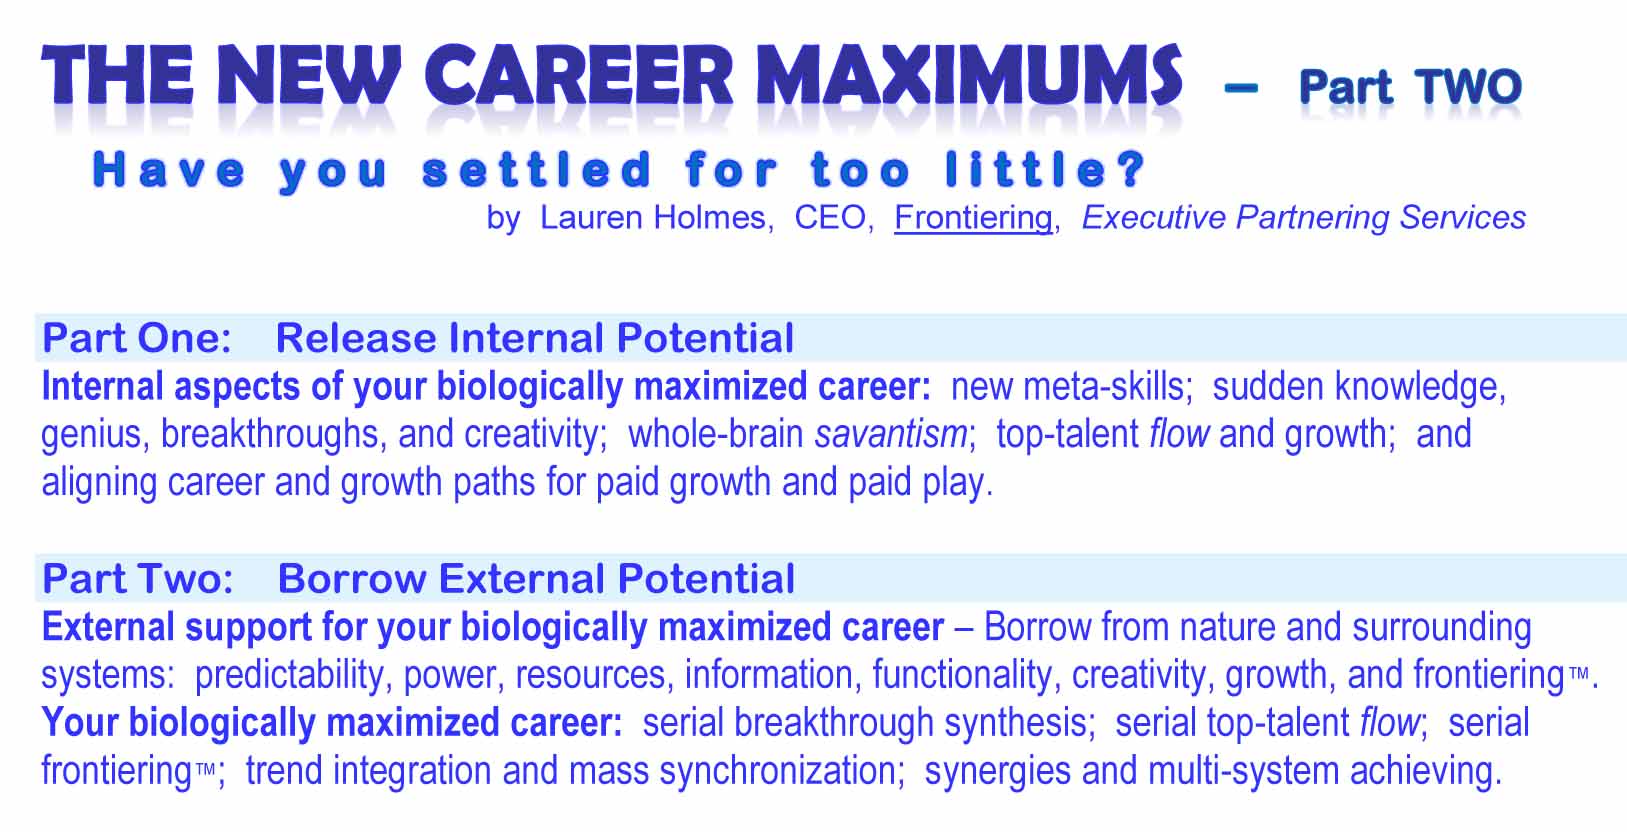 New Career Maximums  - Part Two